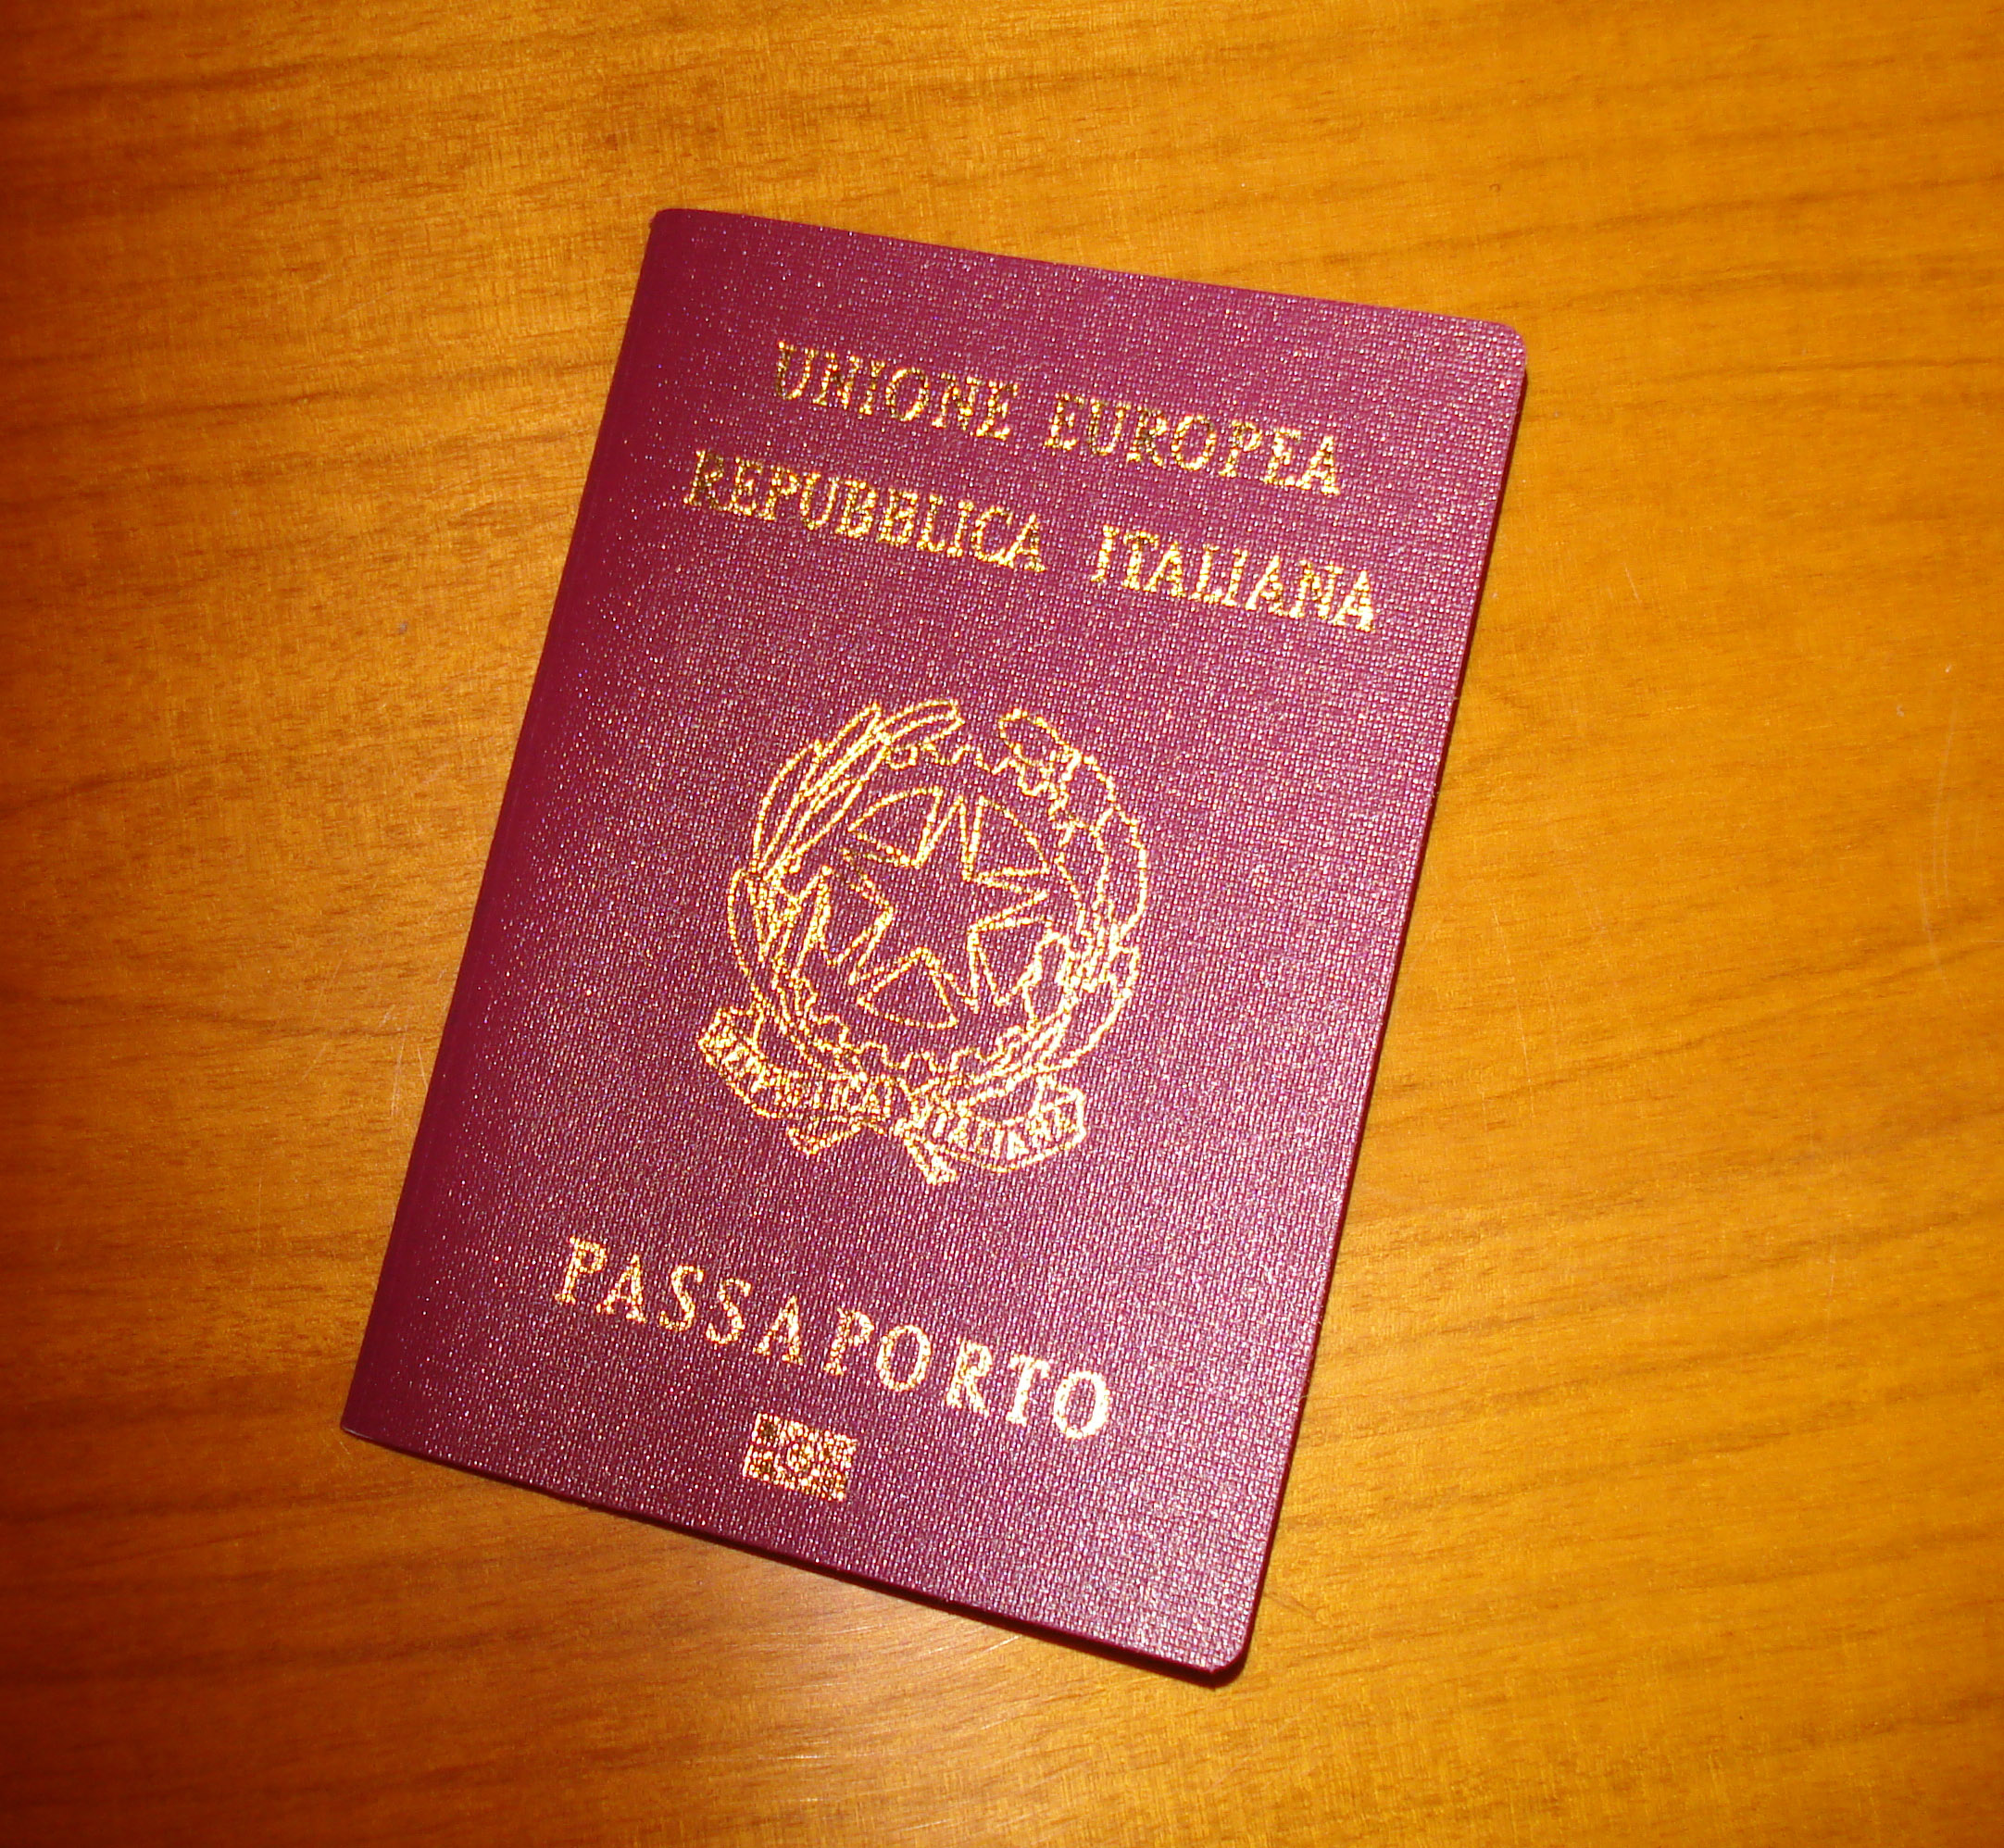 Vietnam Resume Tourist Visa For Italy People From March 2022 | Process To Apply Vietnam Tourist Visa From Italy 2022